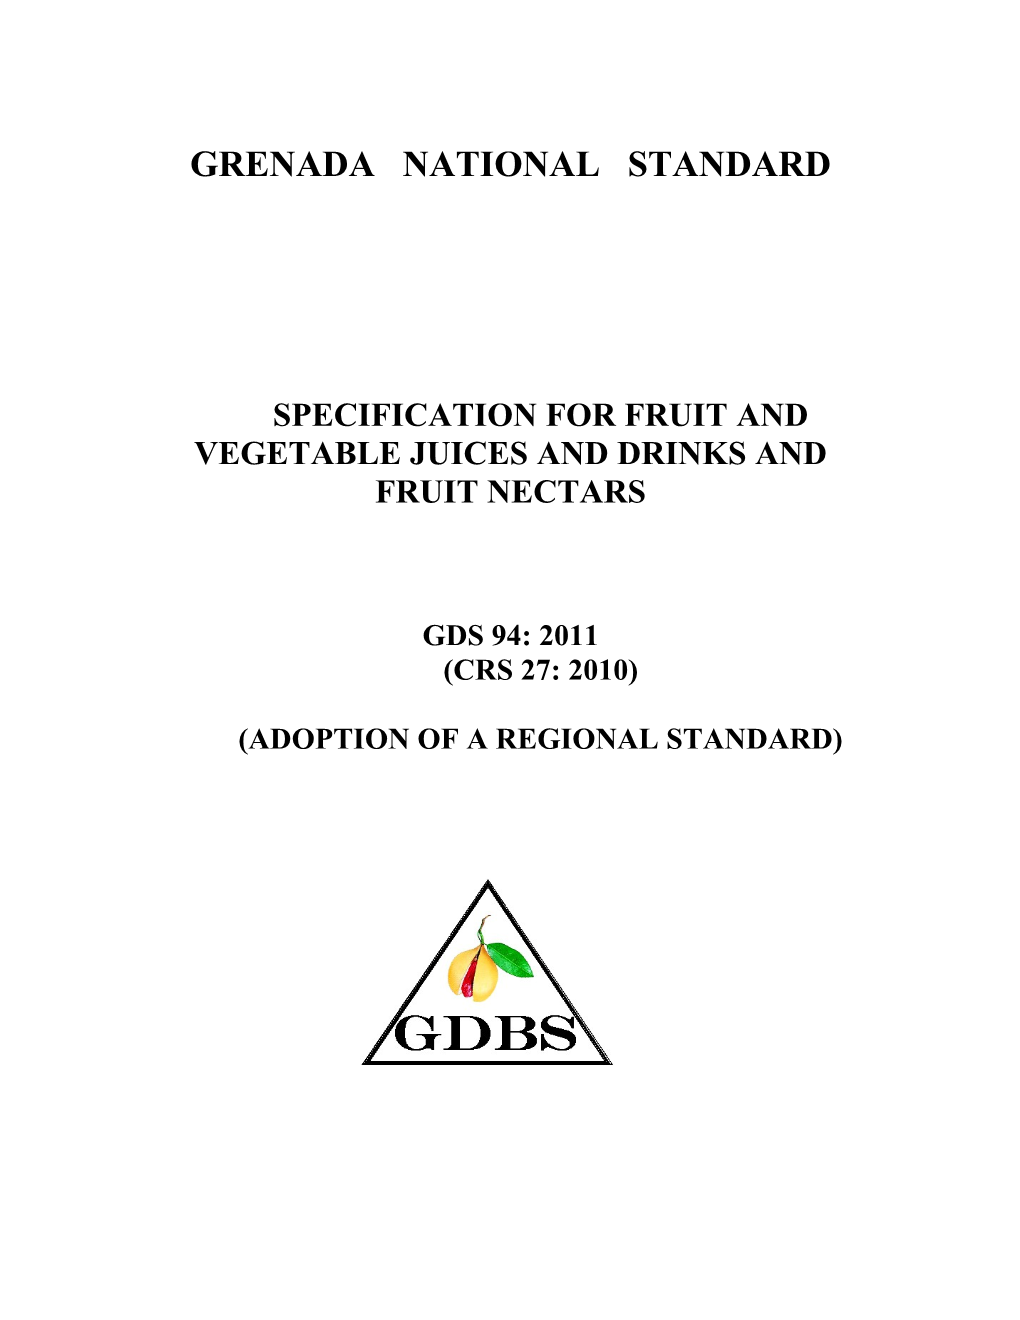 Specification for Fruit and Vegetable Juices and Drinks and Fruit Nectars